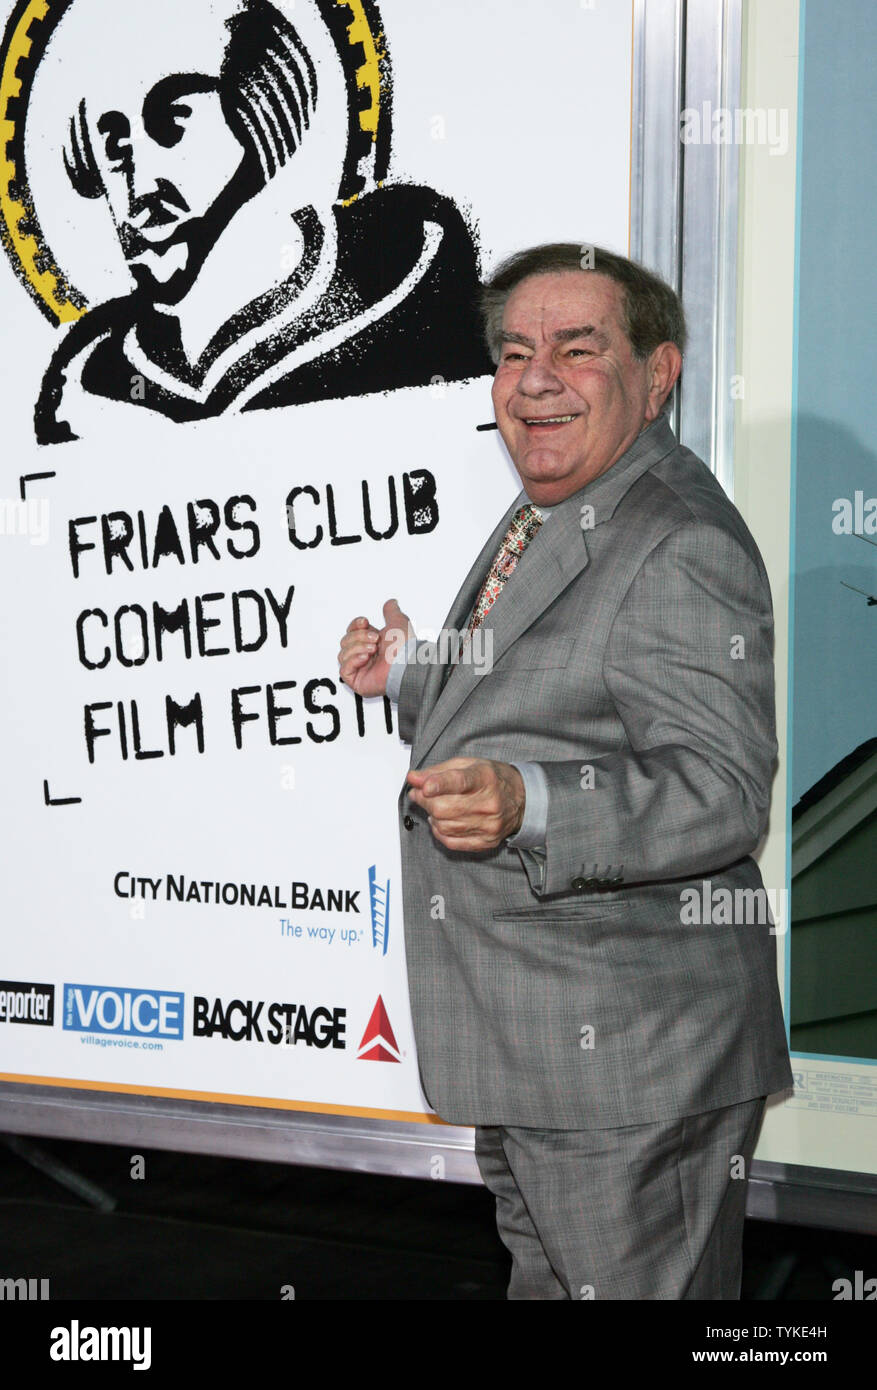 Freddie Roman arrives for the Friars Club Comedy Film Festival premiere of 'A Serious Man' at the Ziegfeld Theater in New York on September 24, 2009.       UPI /Laura Cavanaugh Stock Photo